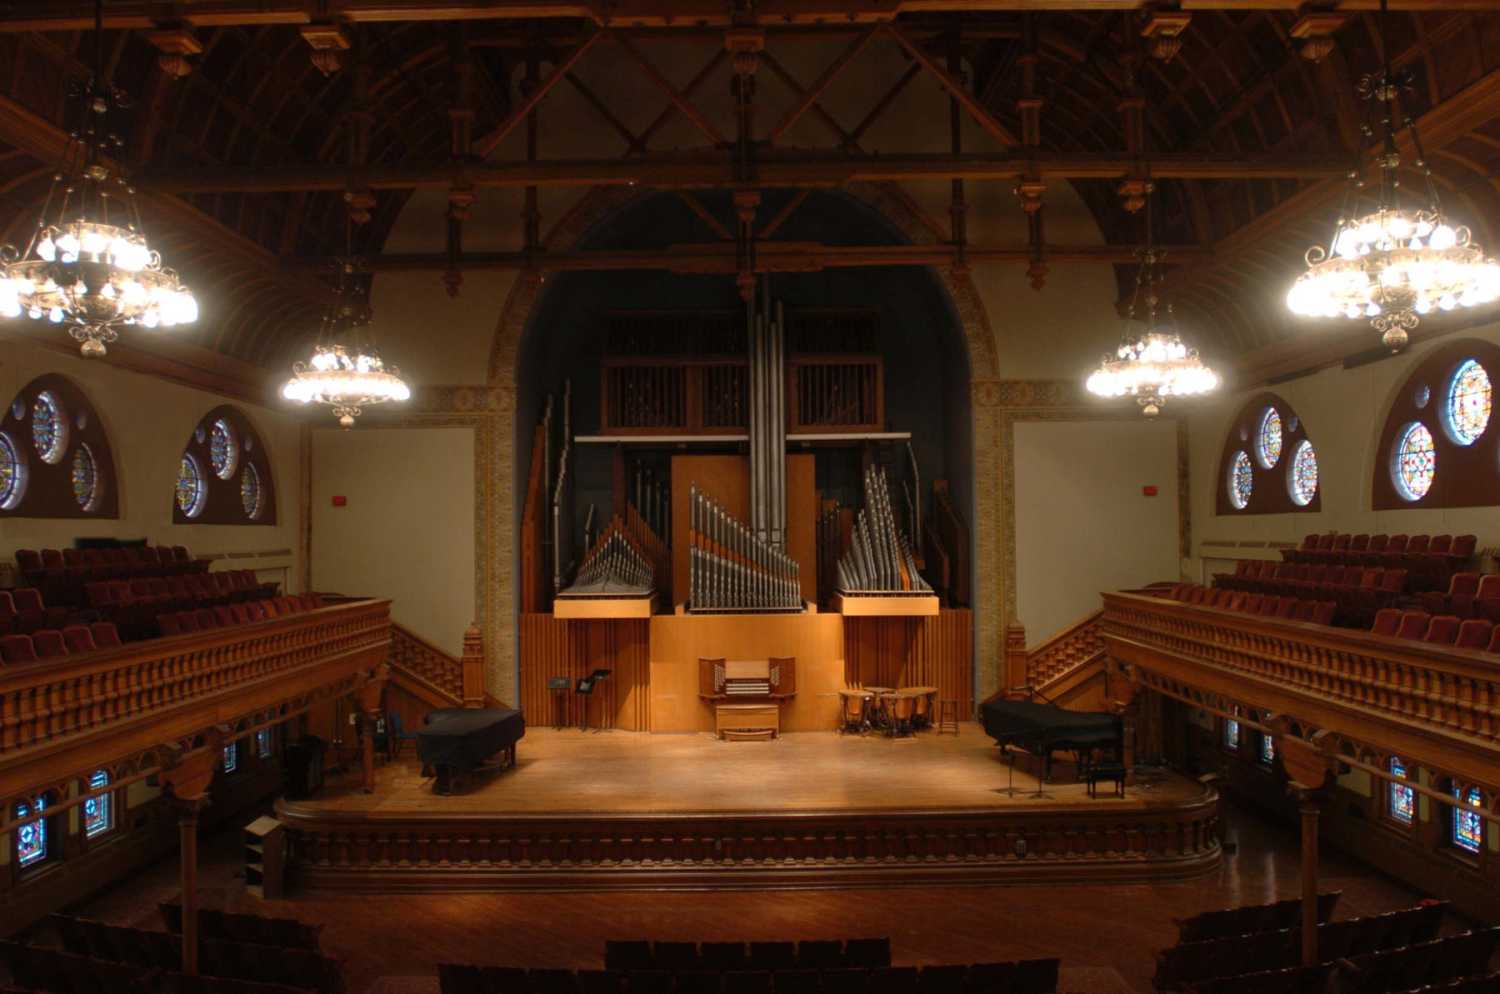 The historic Setnor School of Music at Syracuse University was founded in 1887